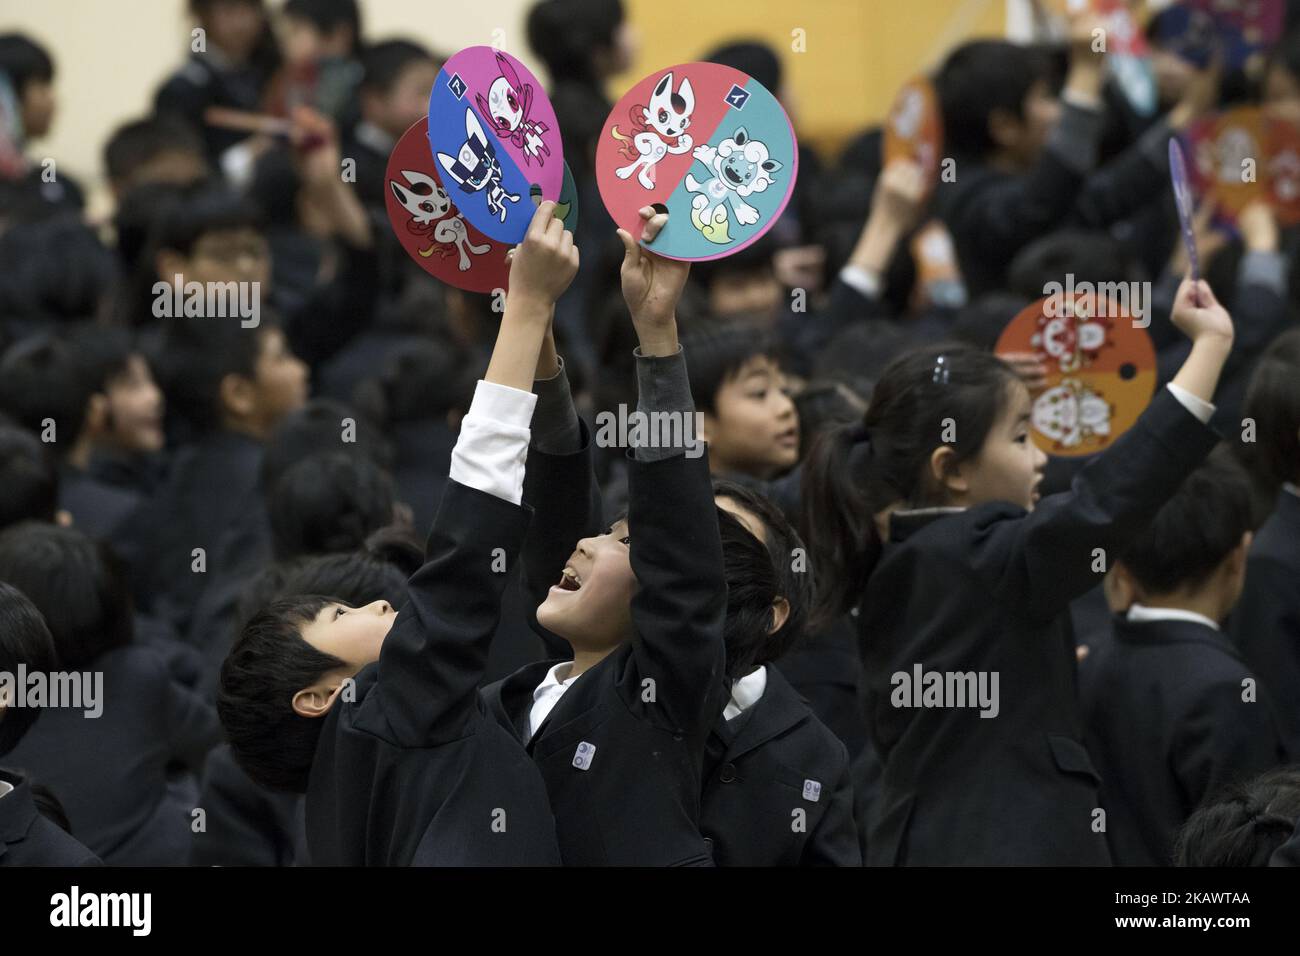 School students celebrate with paper fans showing Tokyo 2020 Olympic Games official mascots at the Hoyonomori Gakuen School in Tokyo, Japan, 28 February 2018. Elementary school students from 16,000 schools accross the country elected the winning mascots from three different designs (Photo by Alessandro Di Ciommo/NurPhoto) Stock Photo